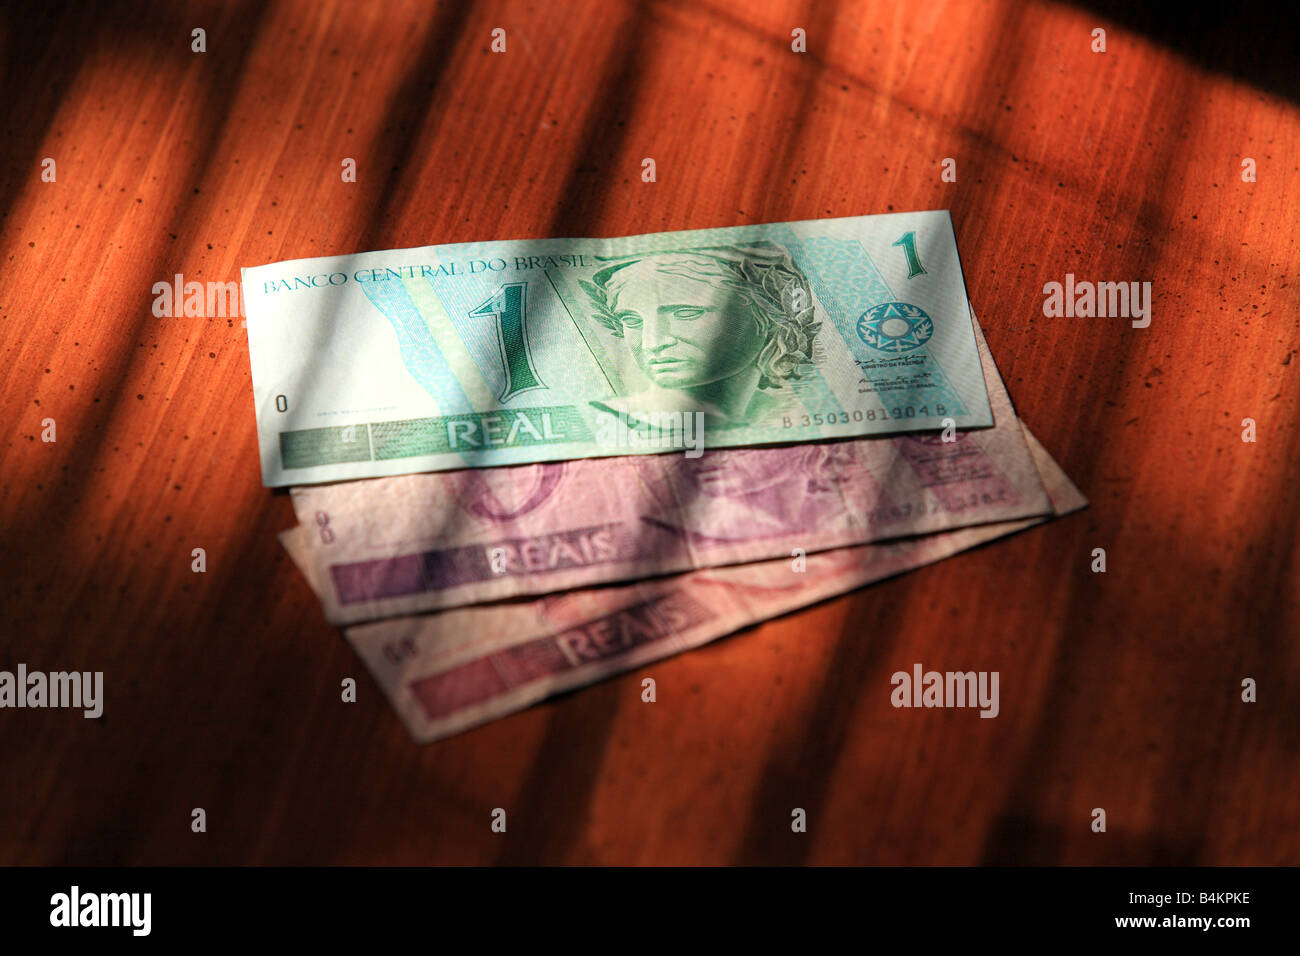 brazilian reais currency bills on a table with shadow Stock Photo